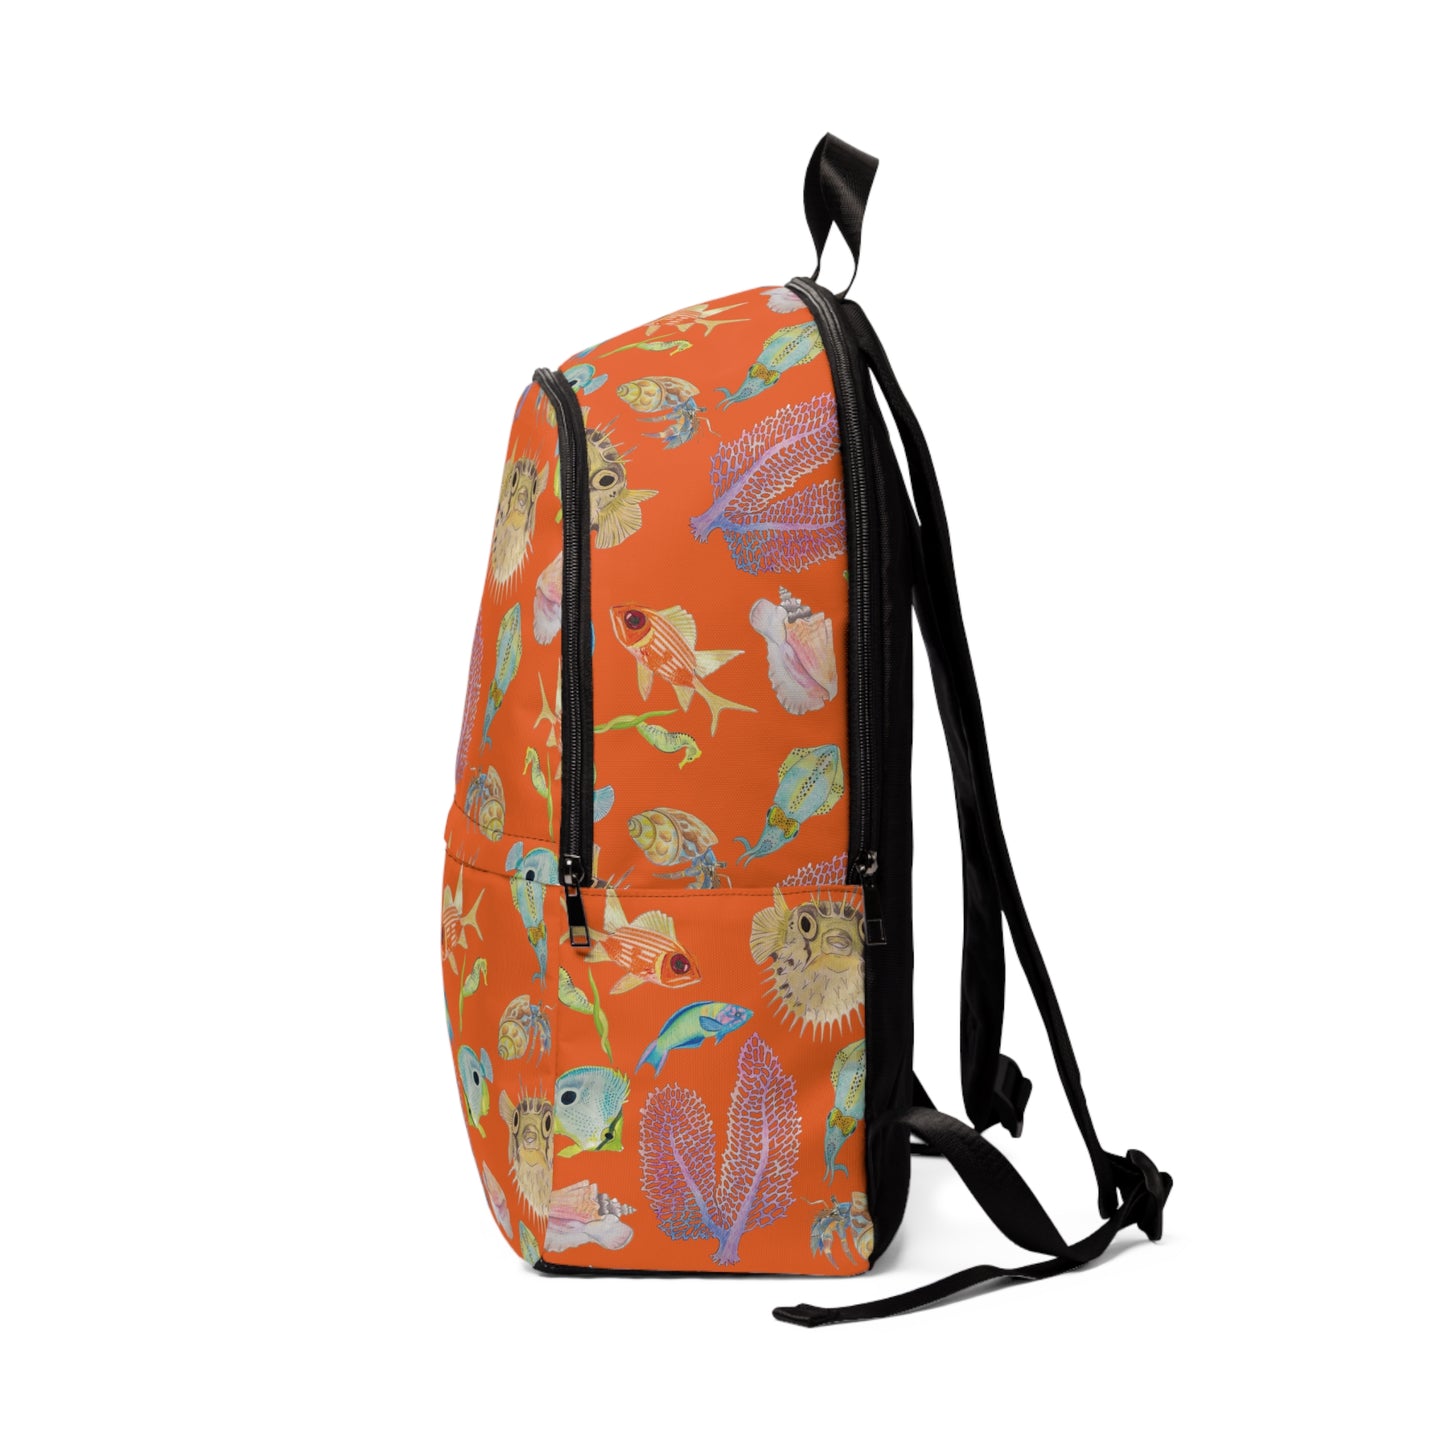 Sargasso Sunrise - Fabric Backpack - Fire